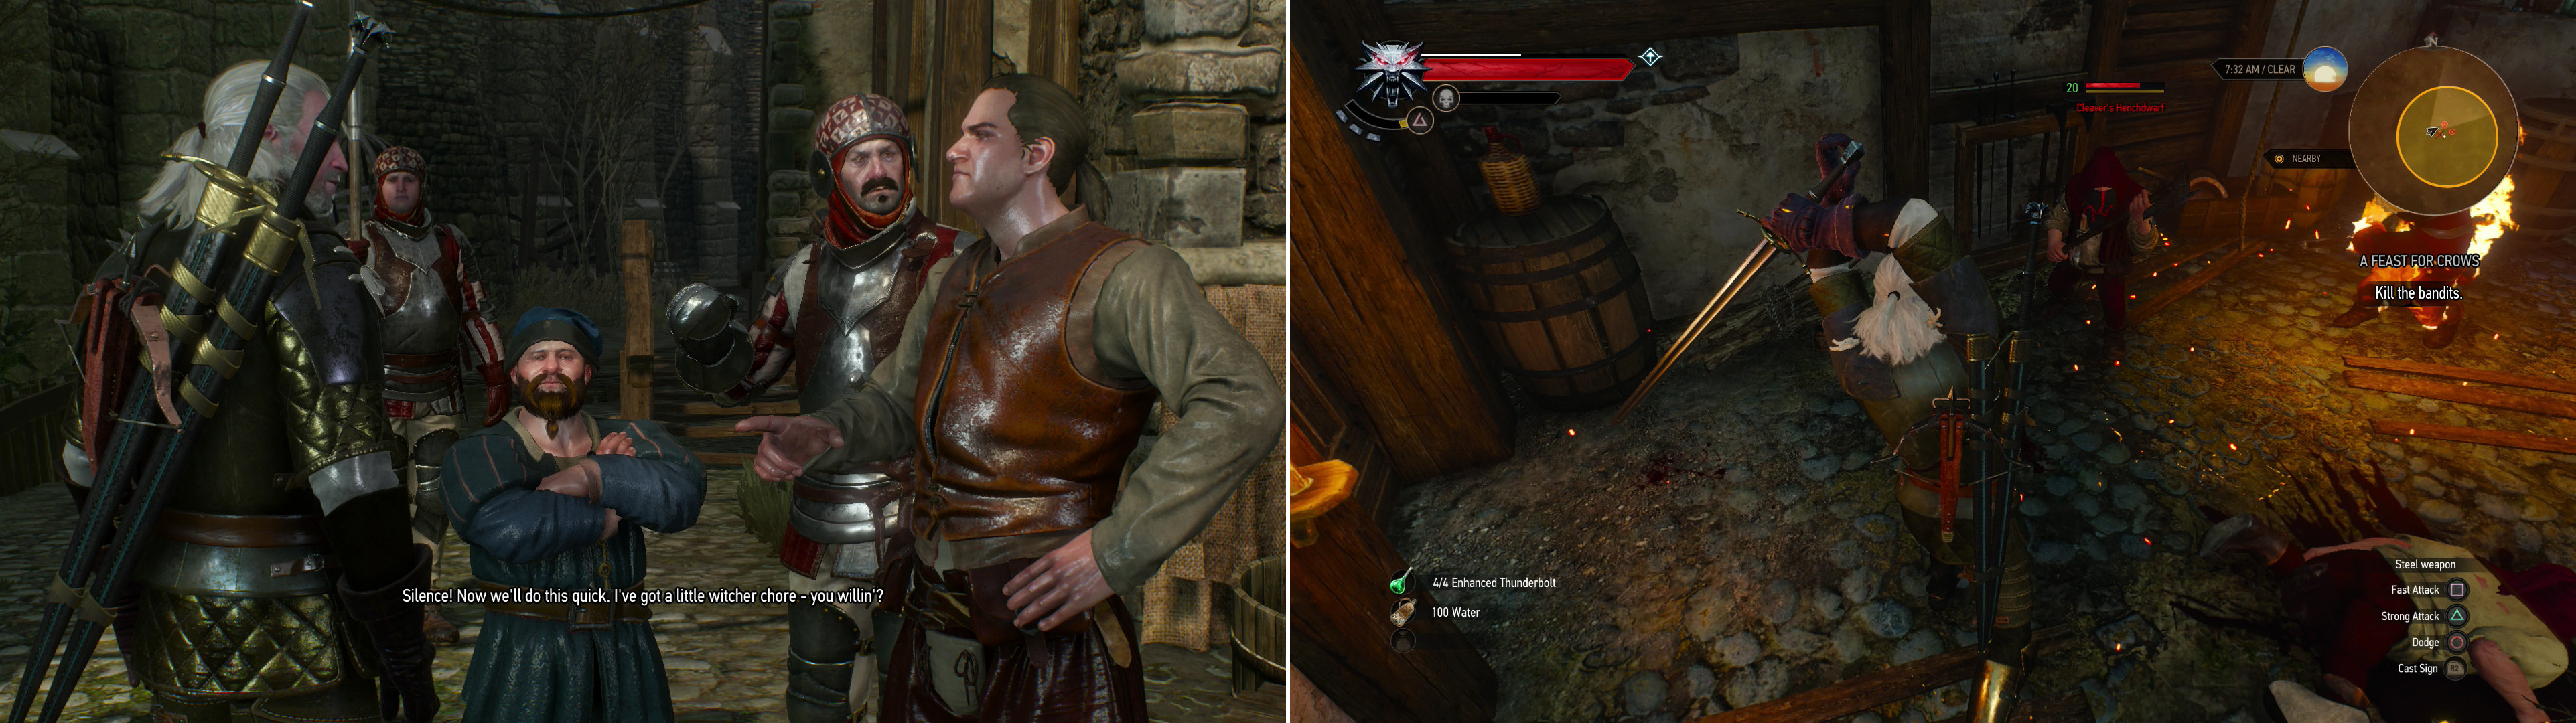 Somebody let a monster loose in a warehouse. Seems like work for a Witcher (left). Defeat Cleaver’s henchmen to claim their treasure (right).